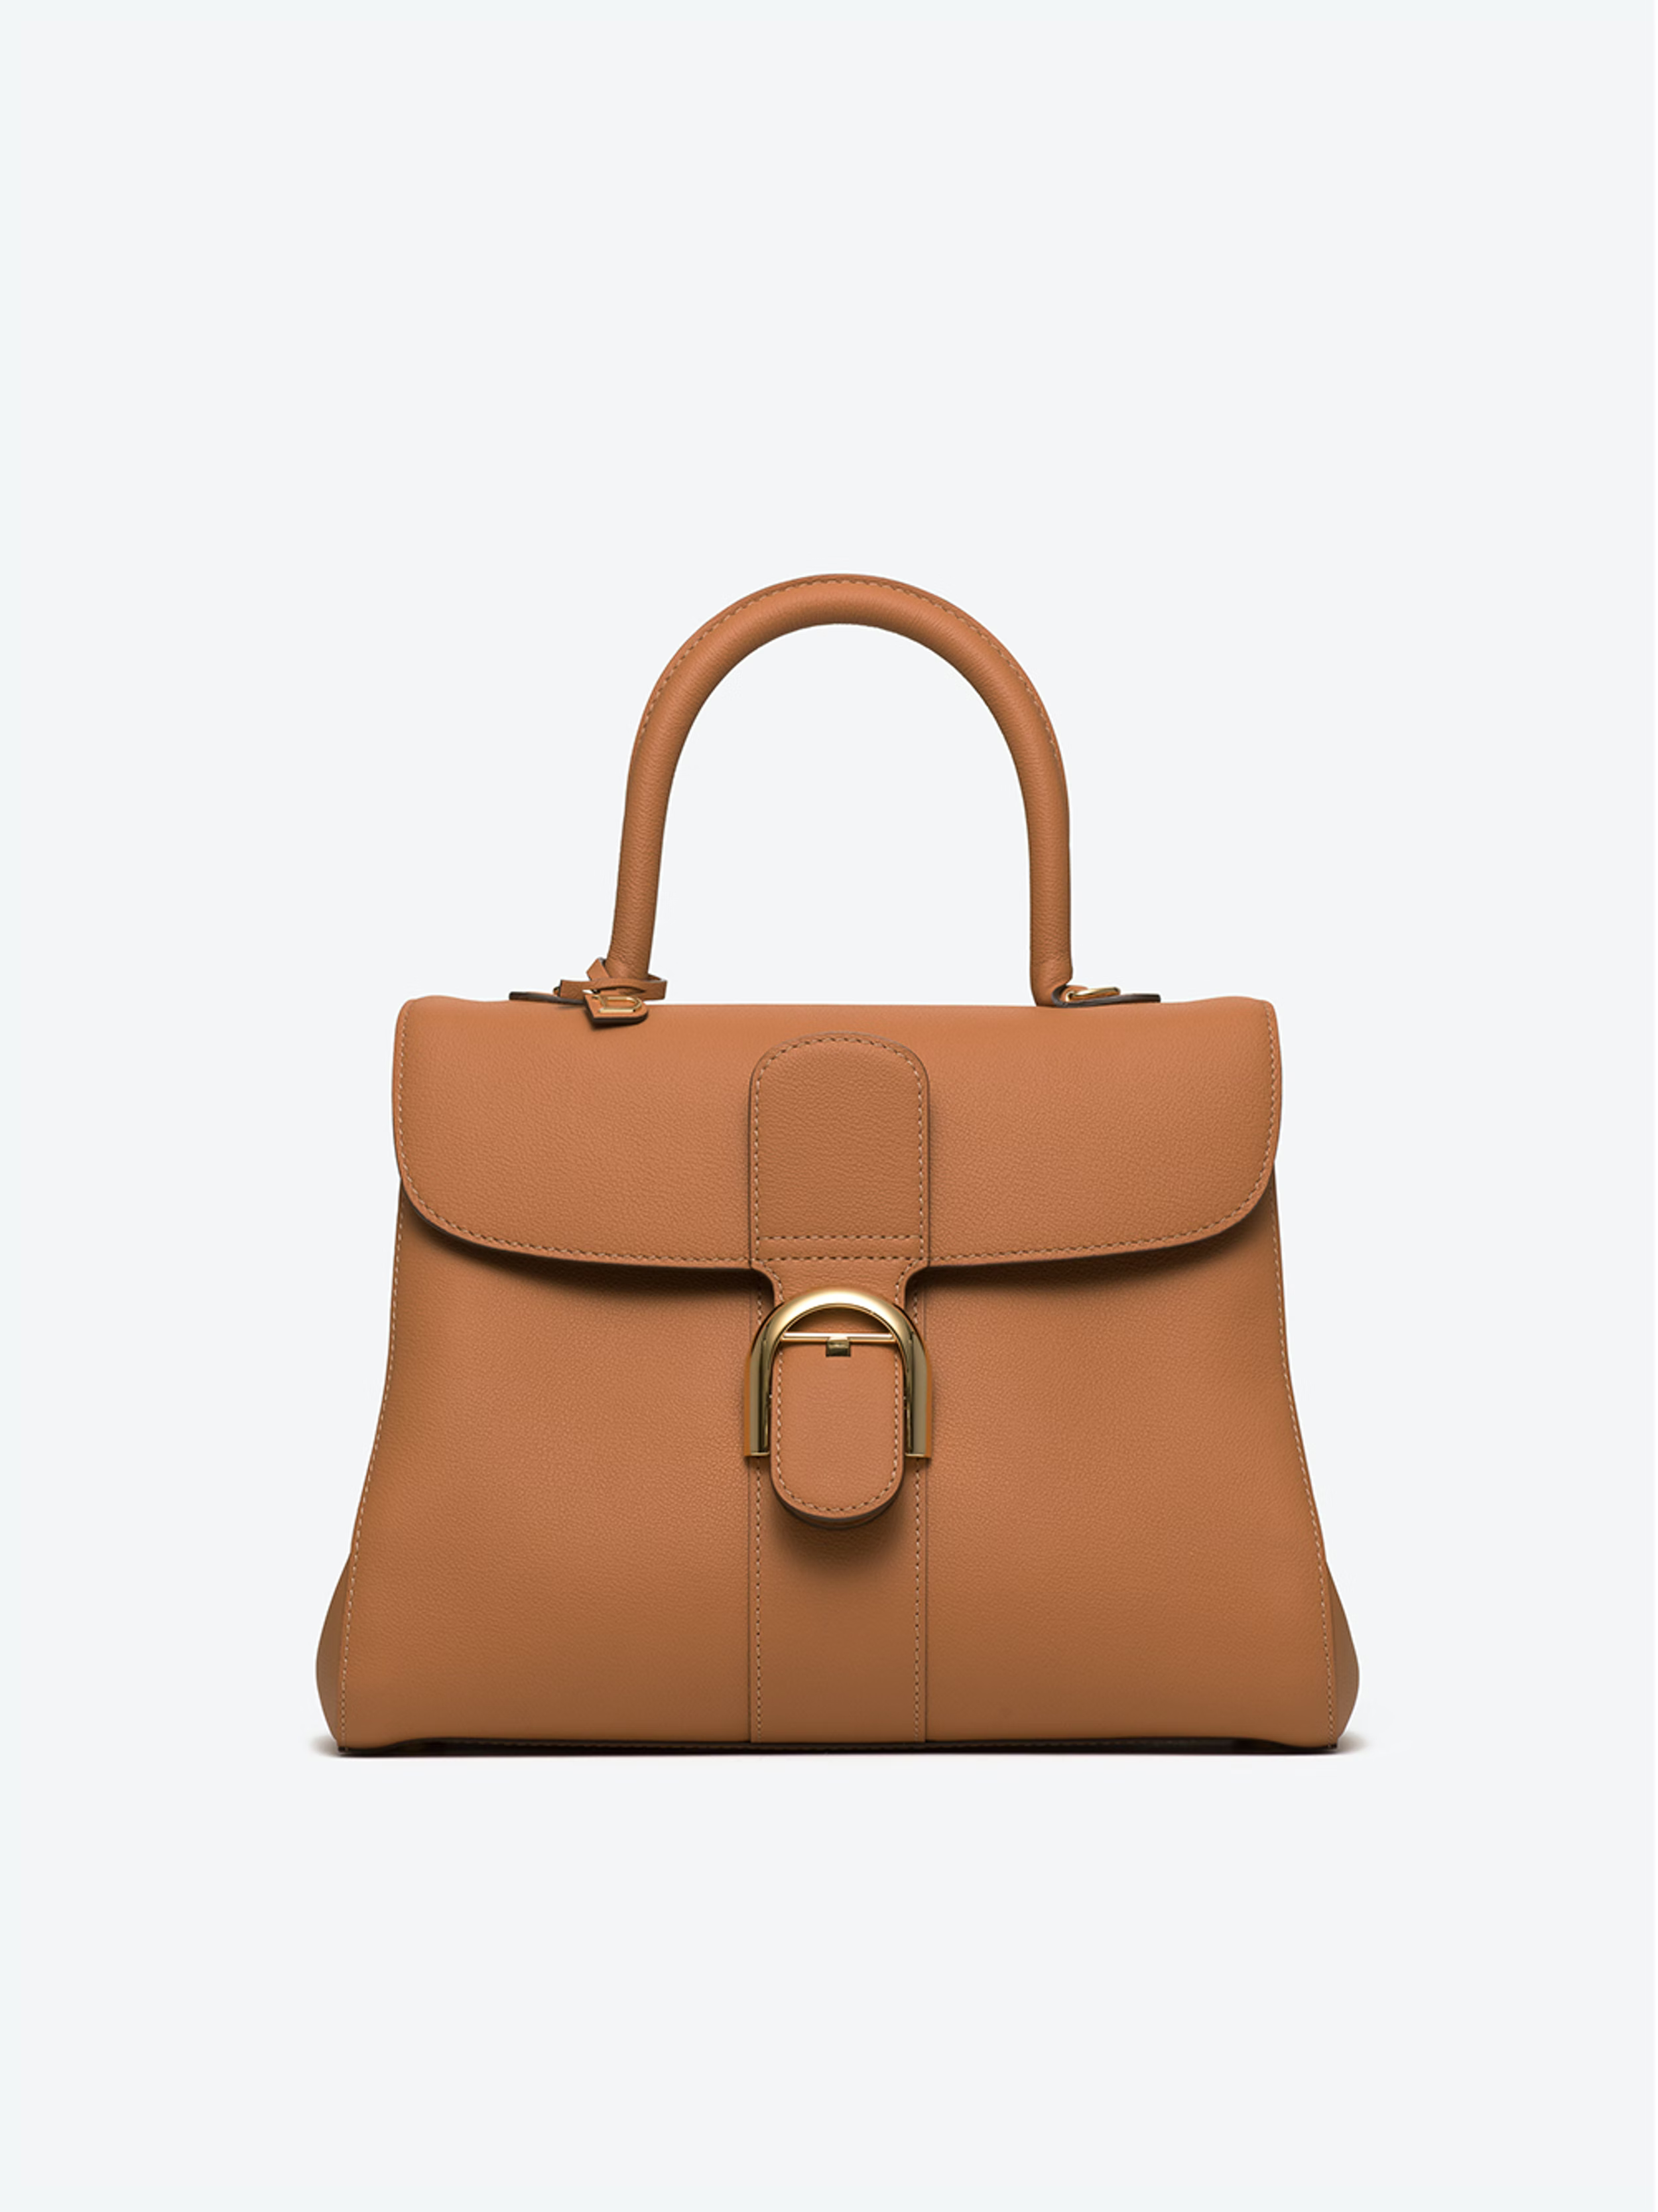 The DELVAUX BRILLANT LUXURY BAG Overview (Everything You Need To Know) 